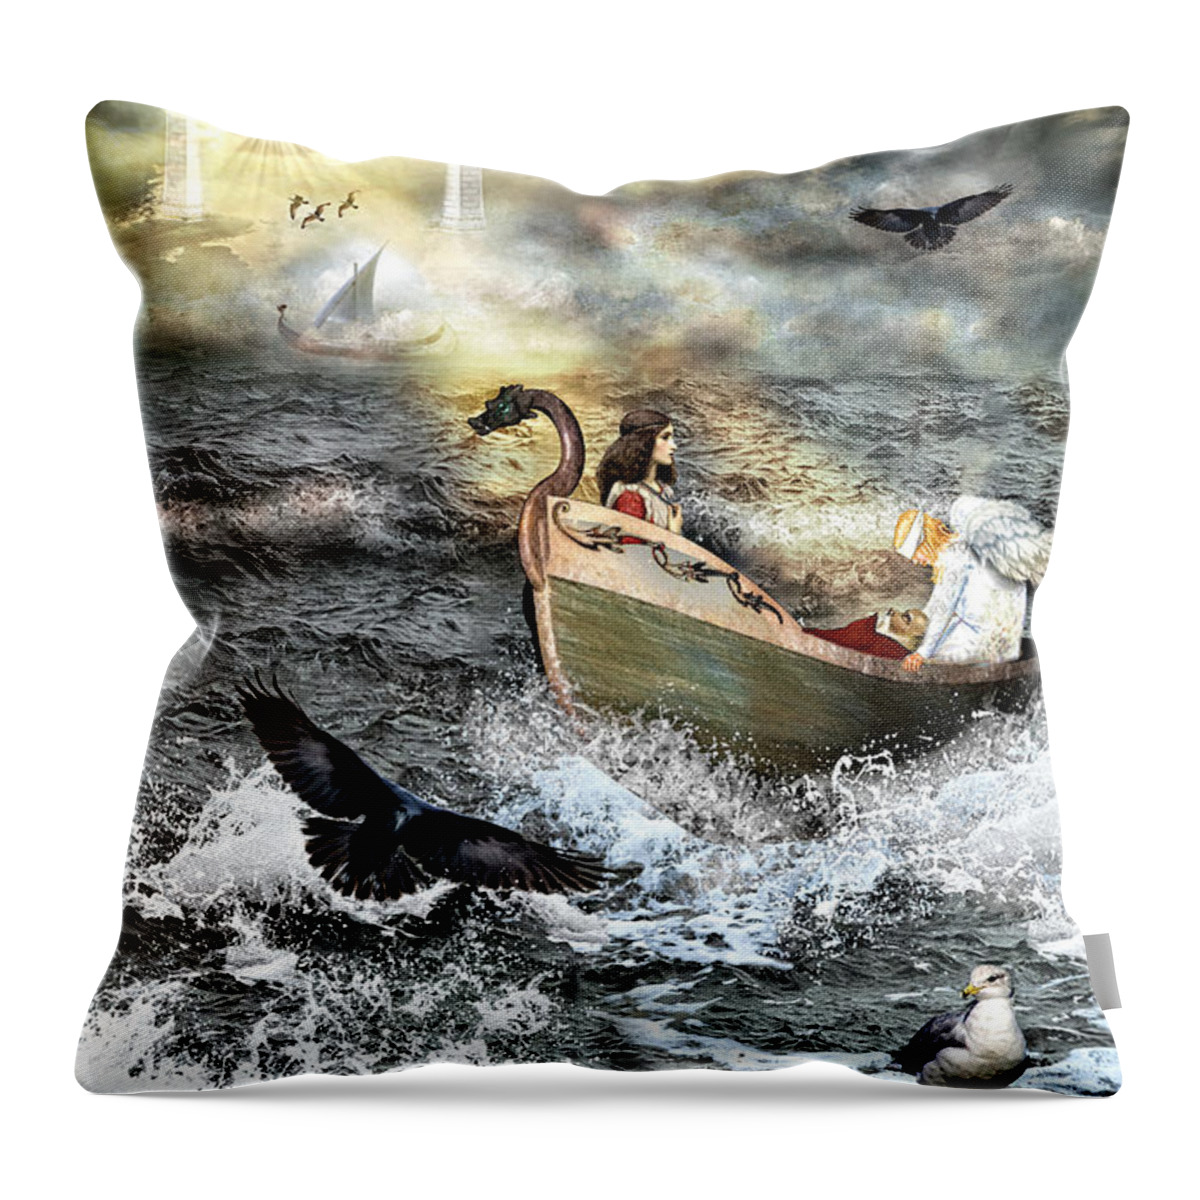 Ebbing Tide Throw Pillow featuring the photograph The Ebbing Tide #1 by Diana Haronis